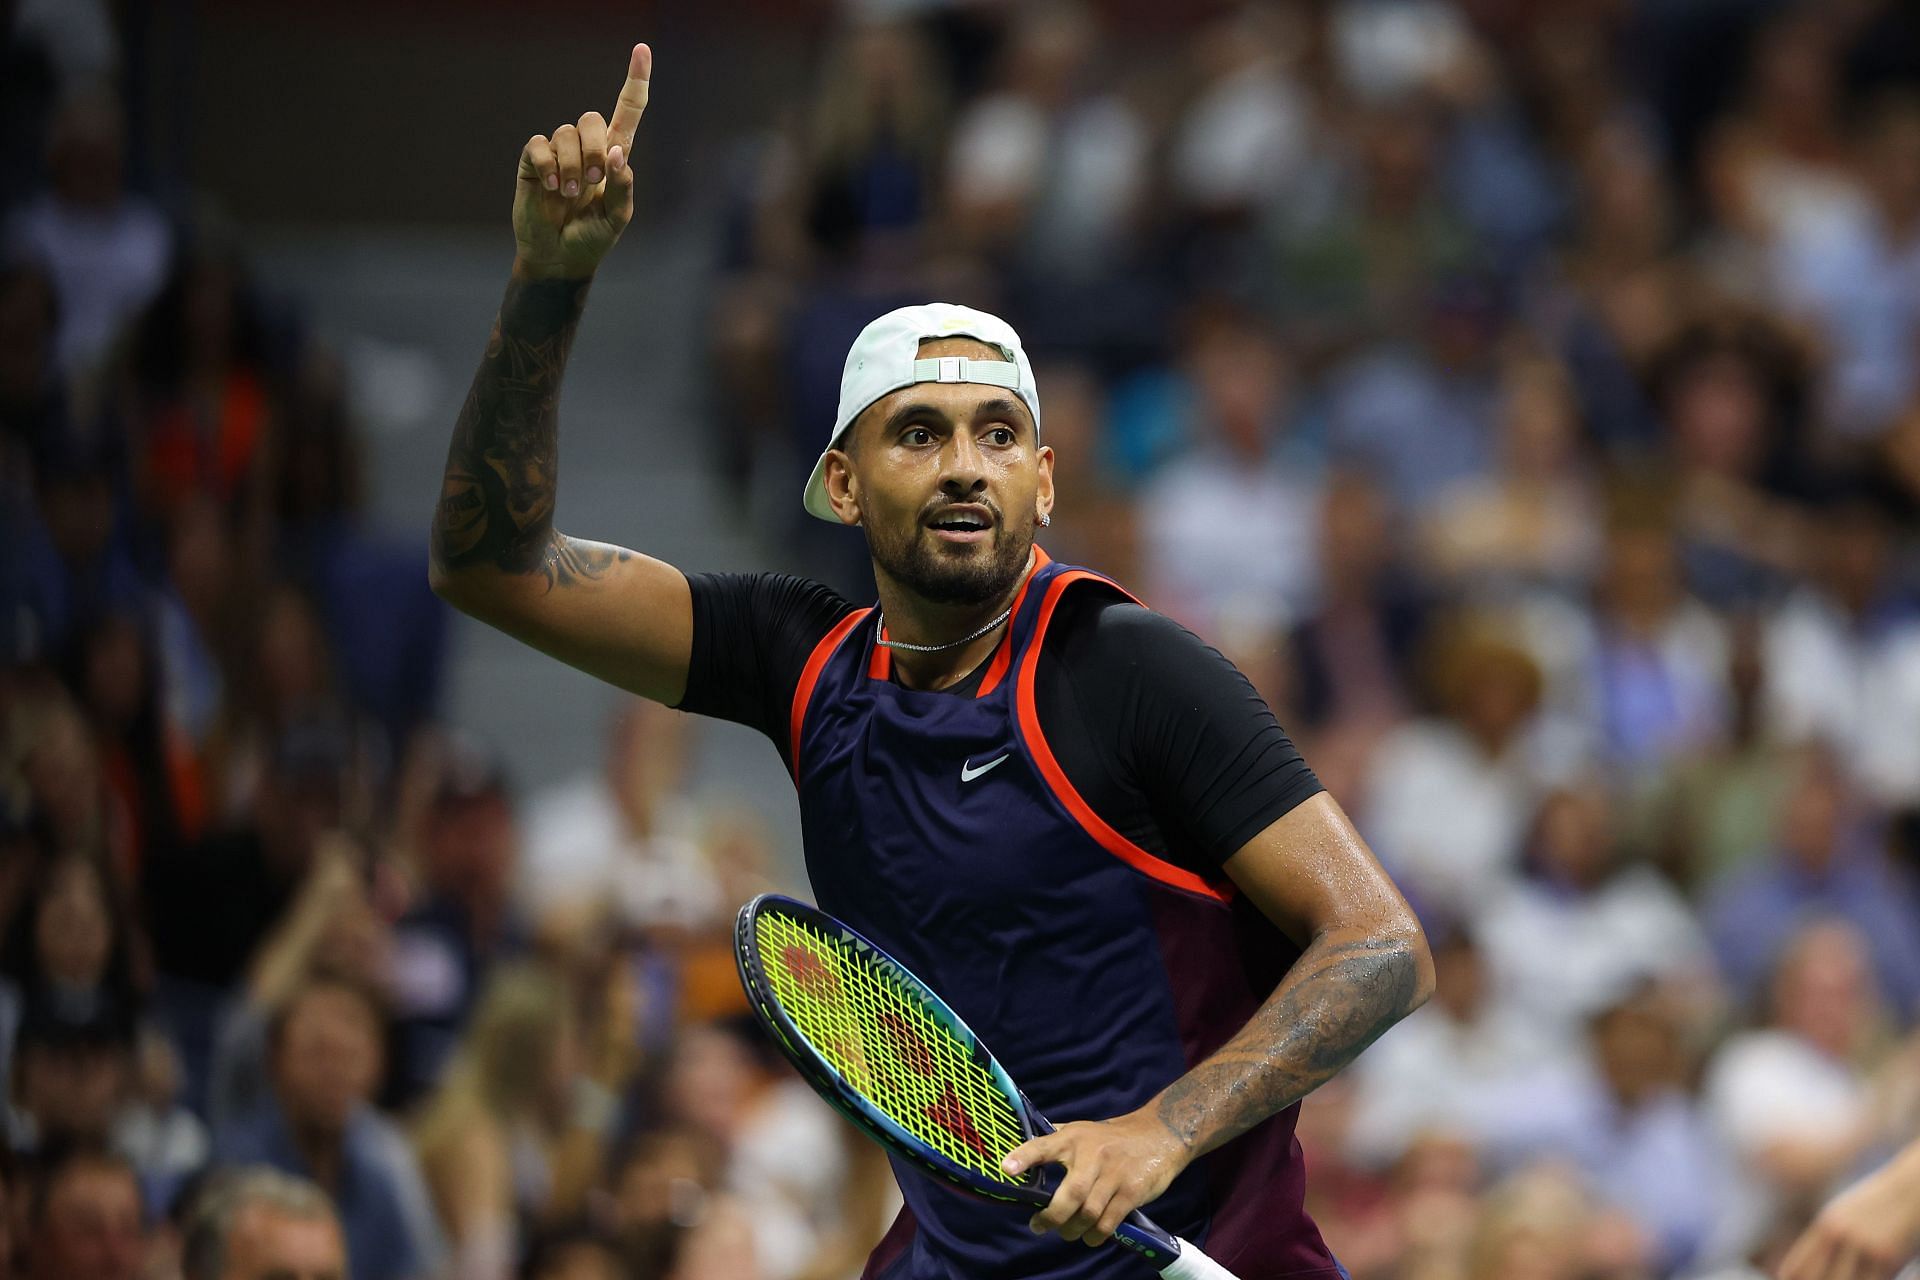 Nick Kyrgios accused Stefanos Tsitsipas of being too soft after the Wimbledon feud